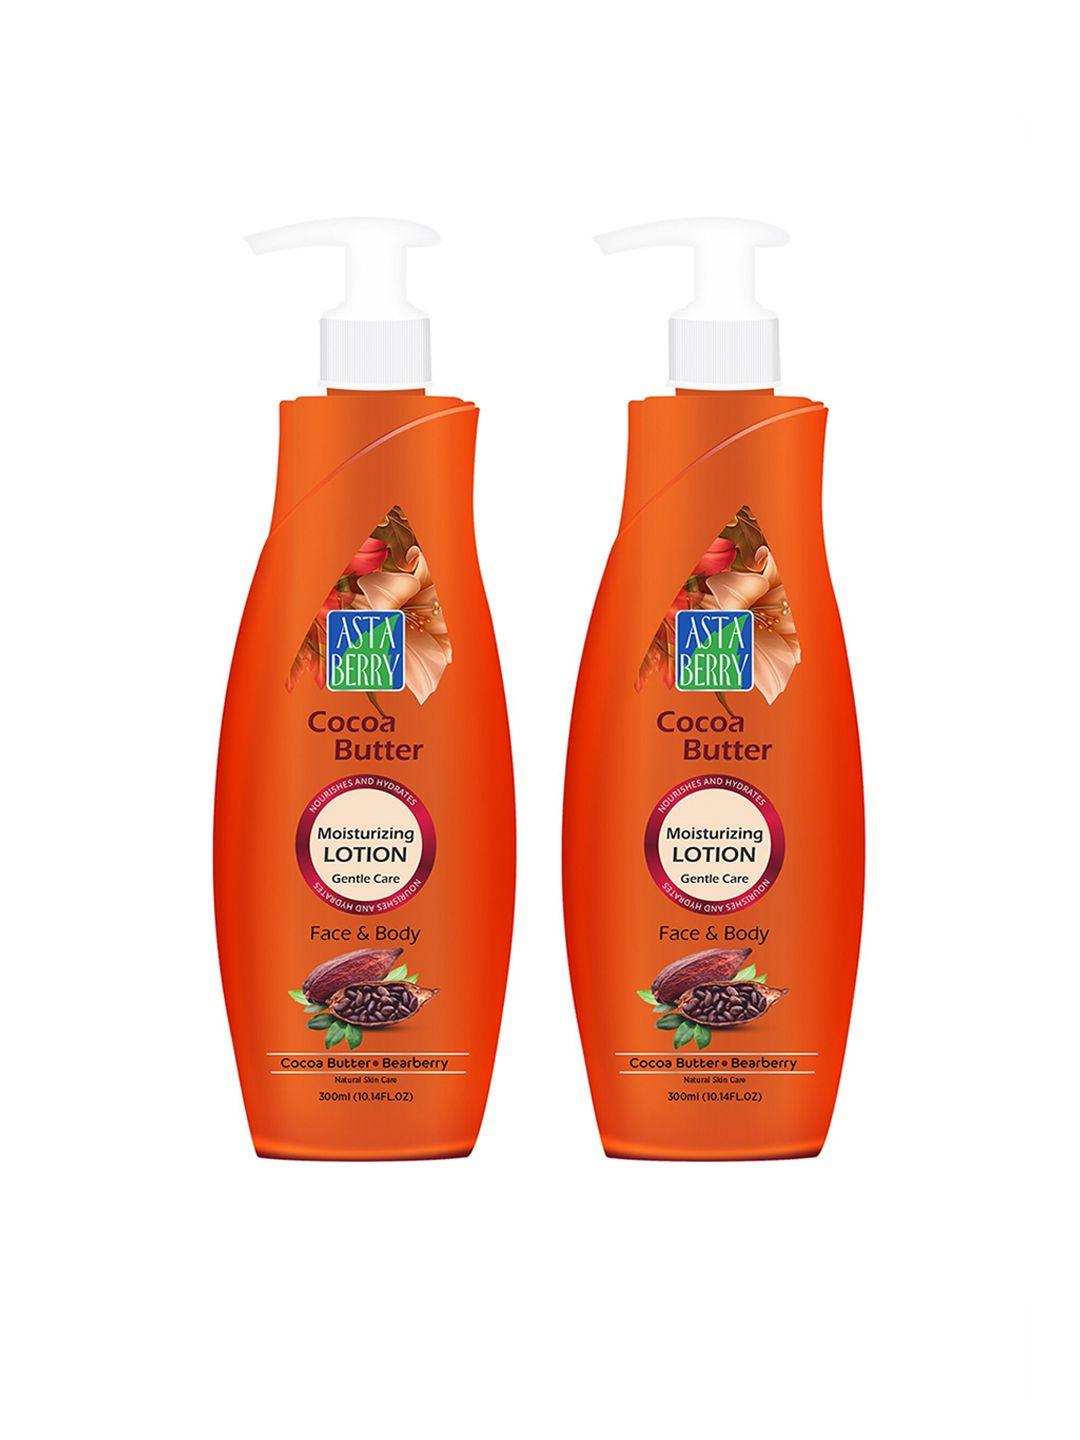 astaberry pack of 2 cocoa butter body lotion 300ml each